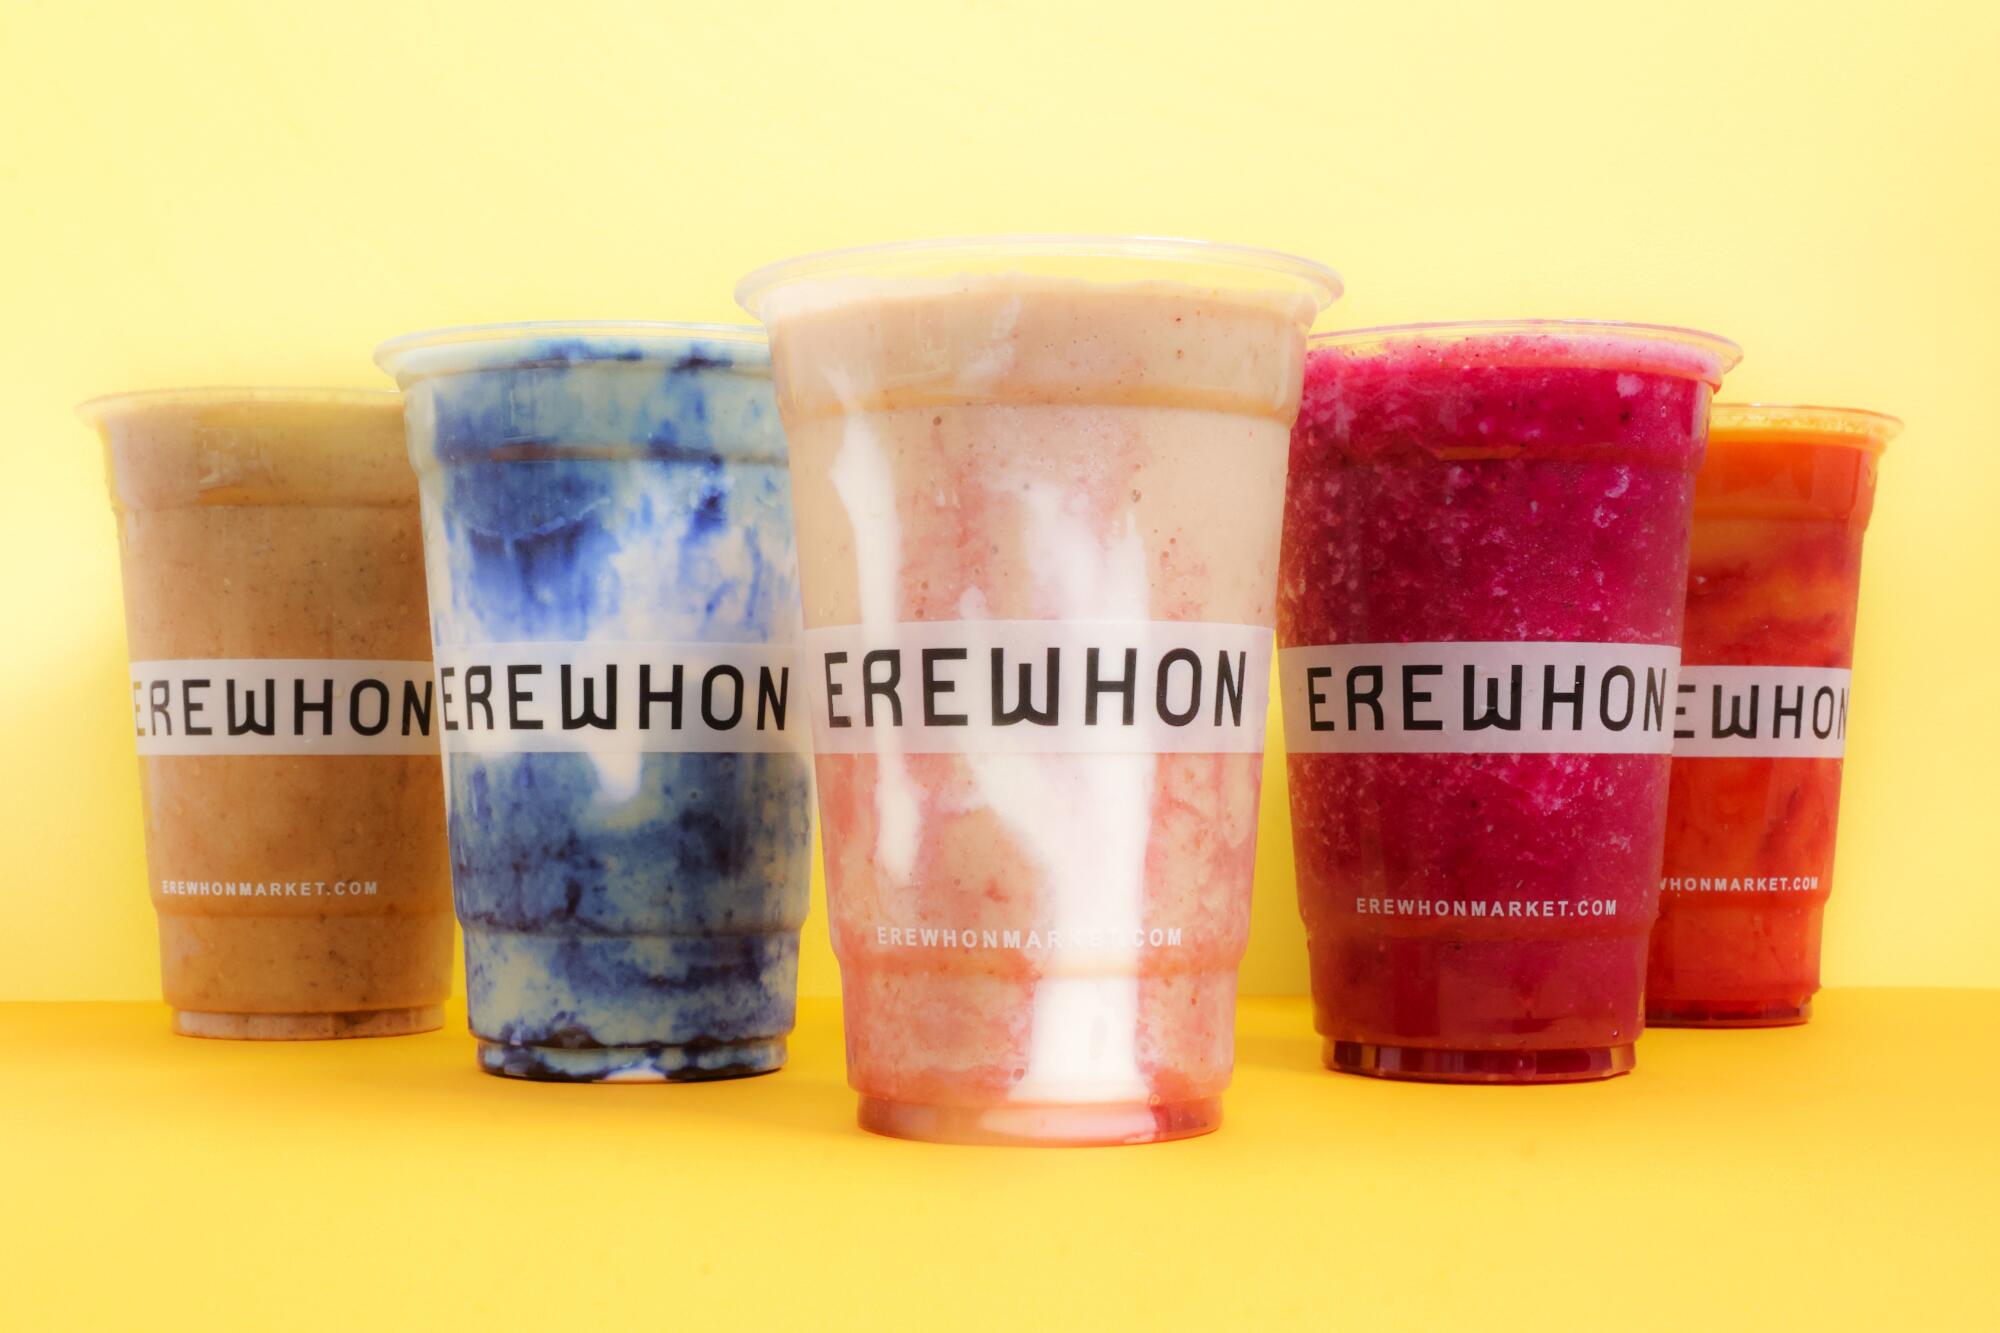 Five smoothies in plastic cups that say "Erewhon"